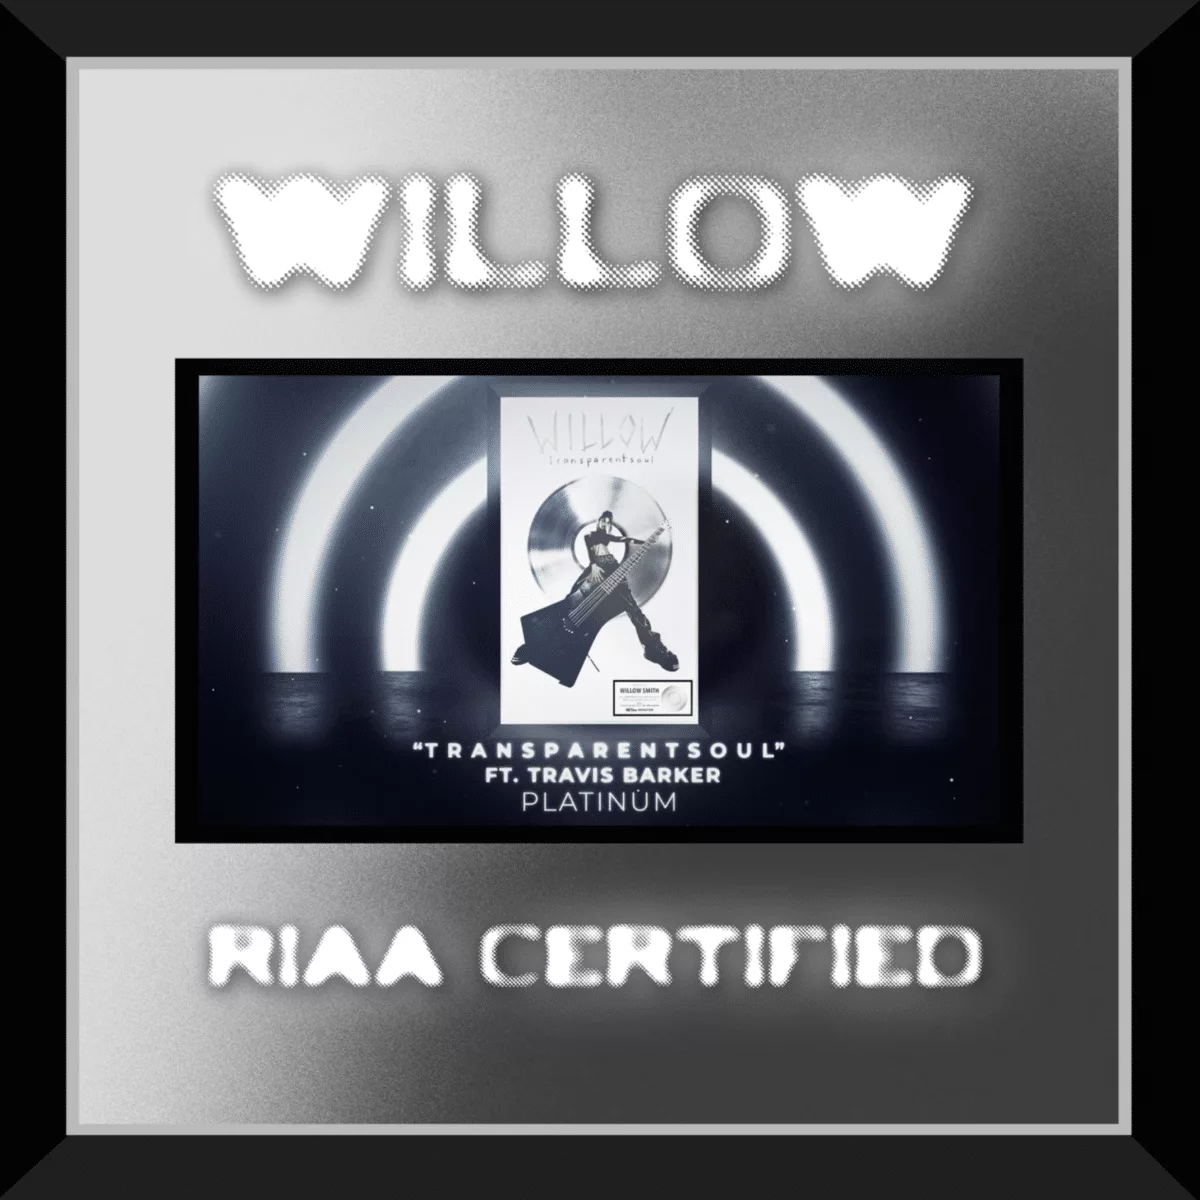 image of the Willow NFT plaque from the RIAA